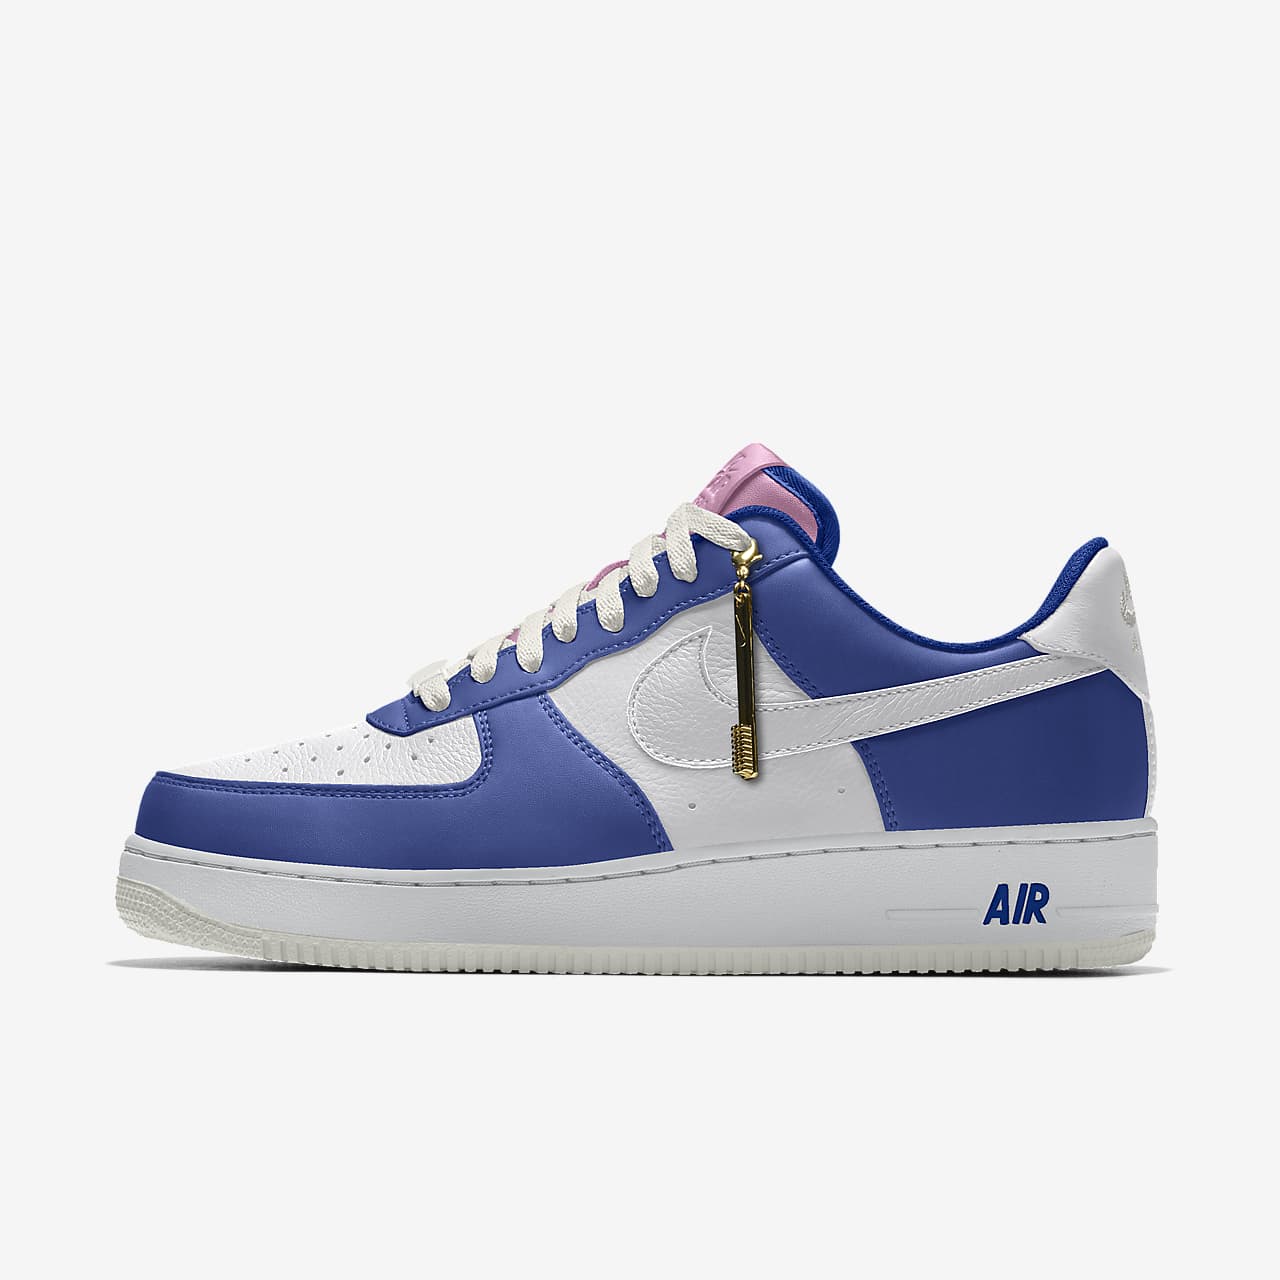 Nike Air Force 1 Low By You Unlocked 专属定制男子运动鞋